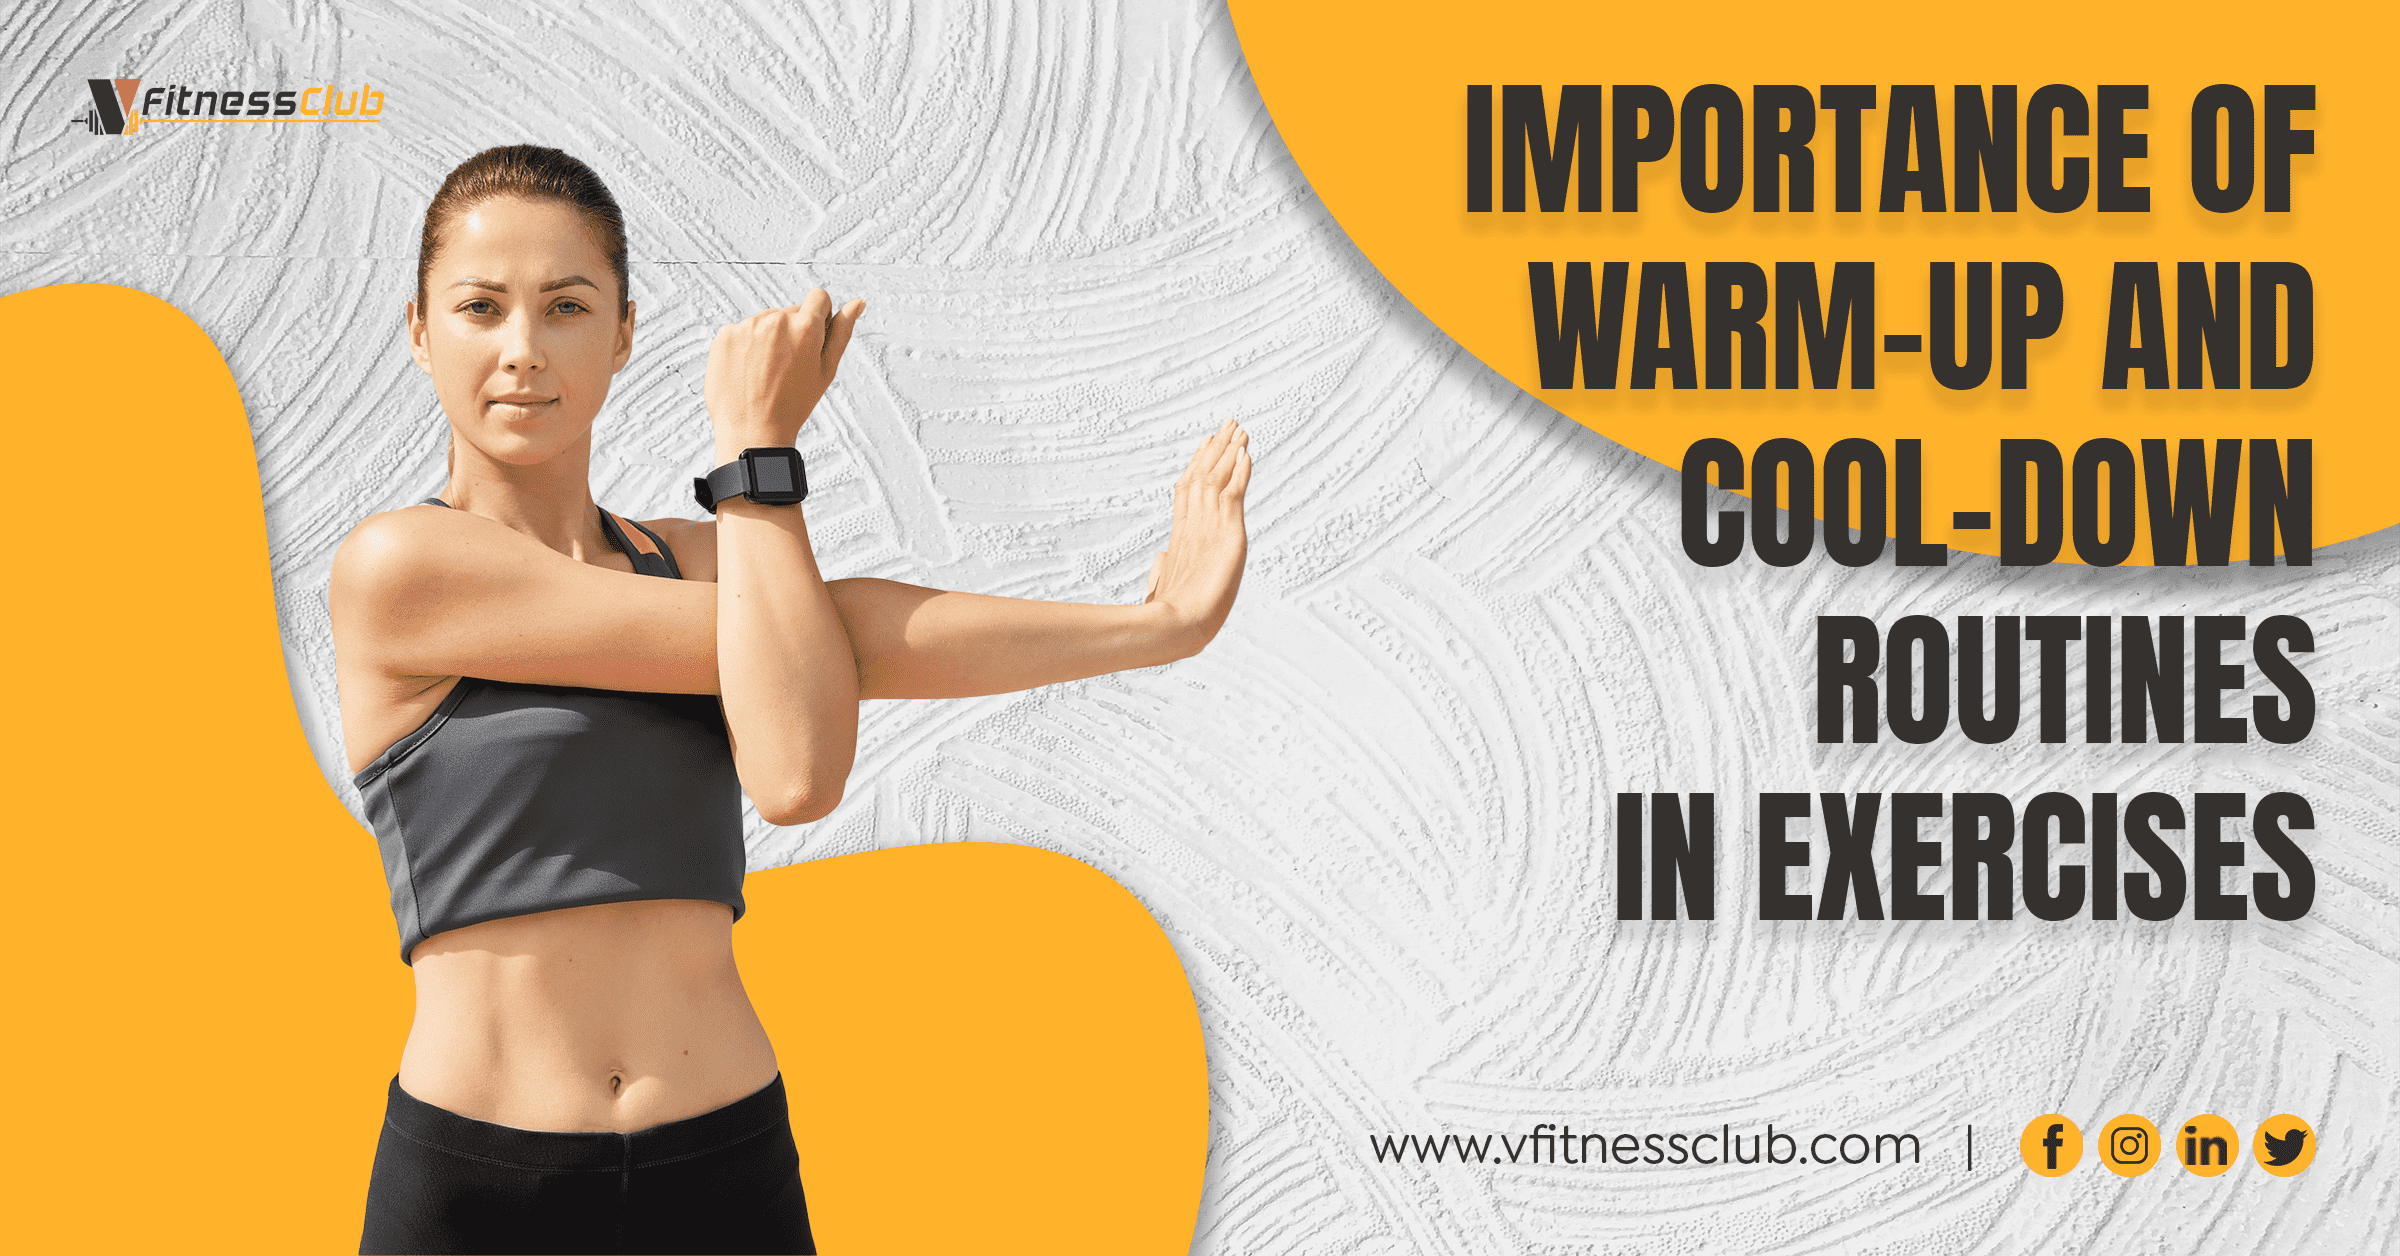 Importance of Warm-Up and Cool-Down Routines in Exercises